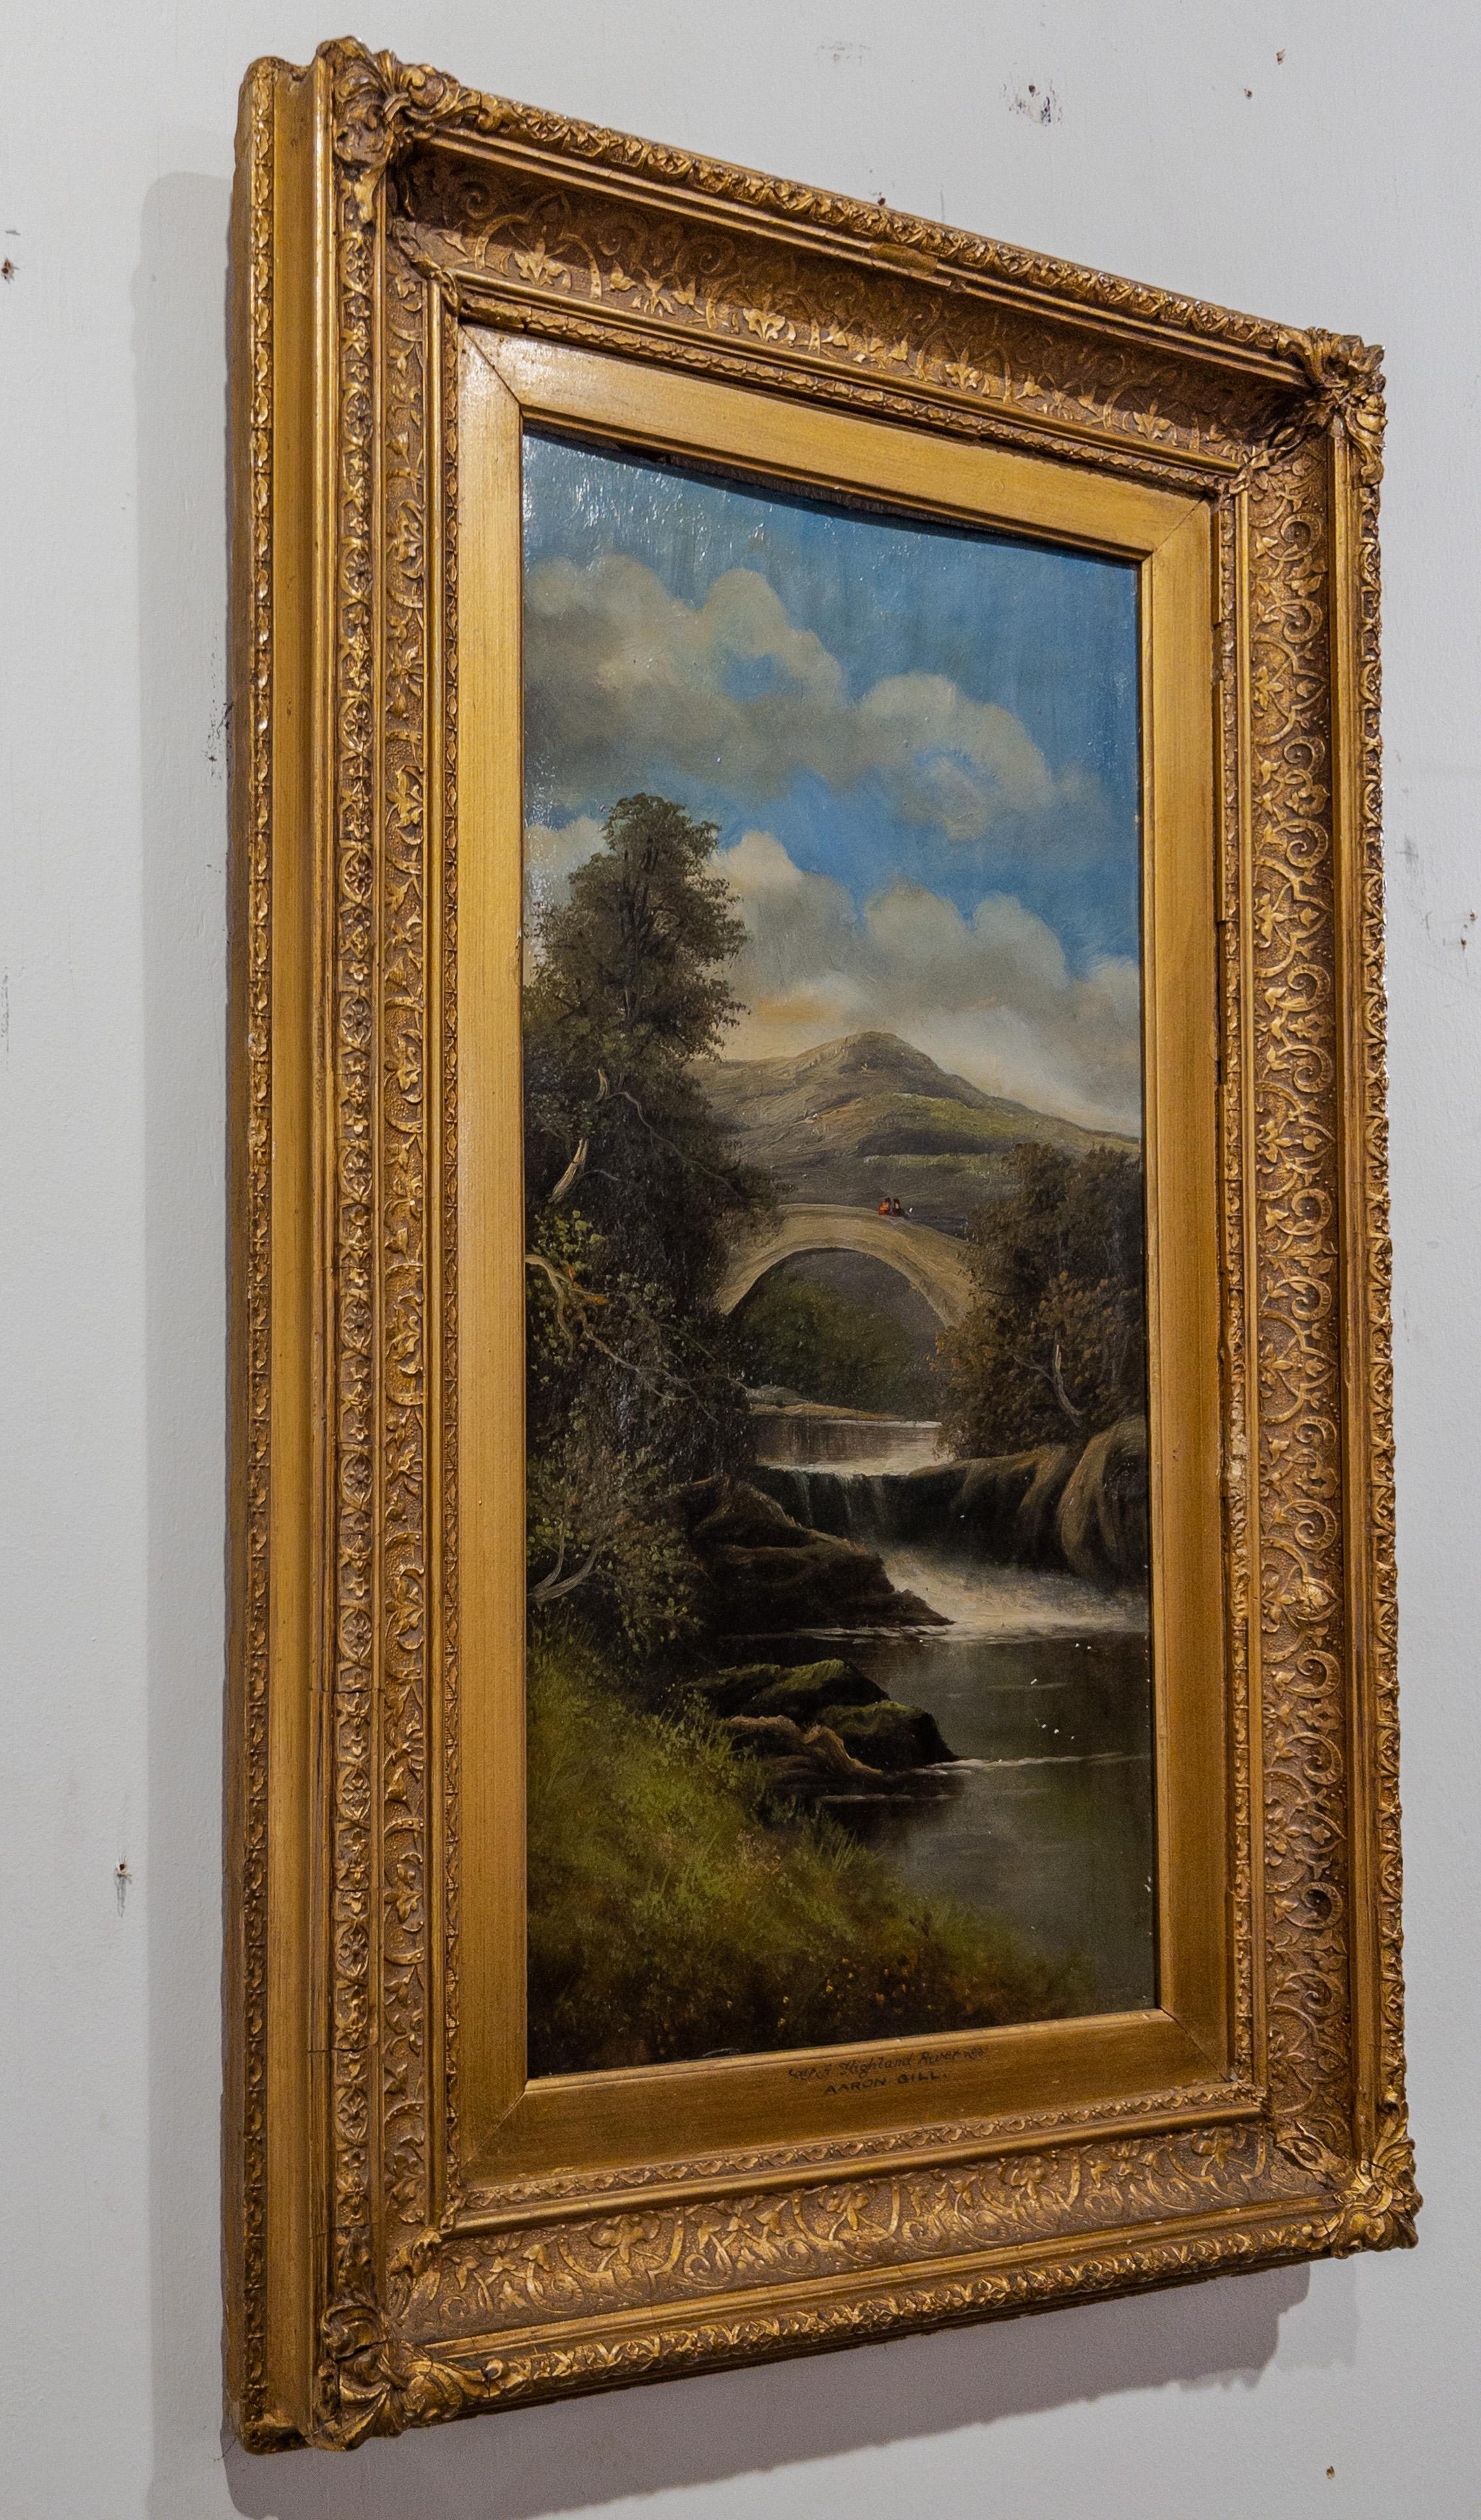 Canvas Vintage Oil Painting Entitled “Highland River” by Aaron Gill in a Gilt Frame For Sale